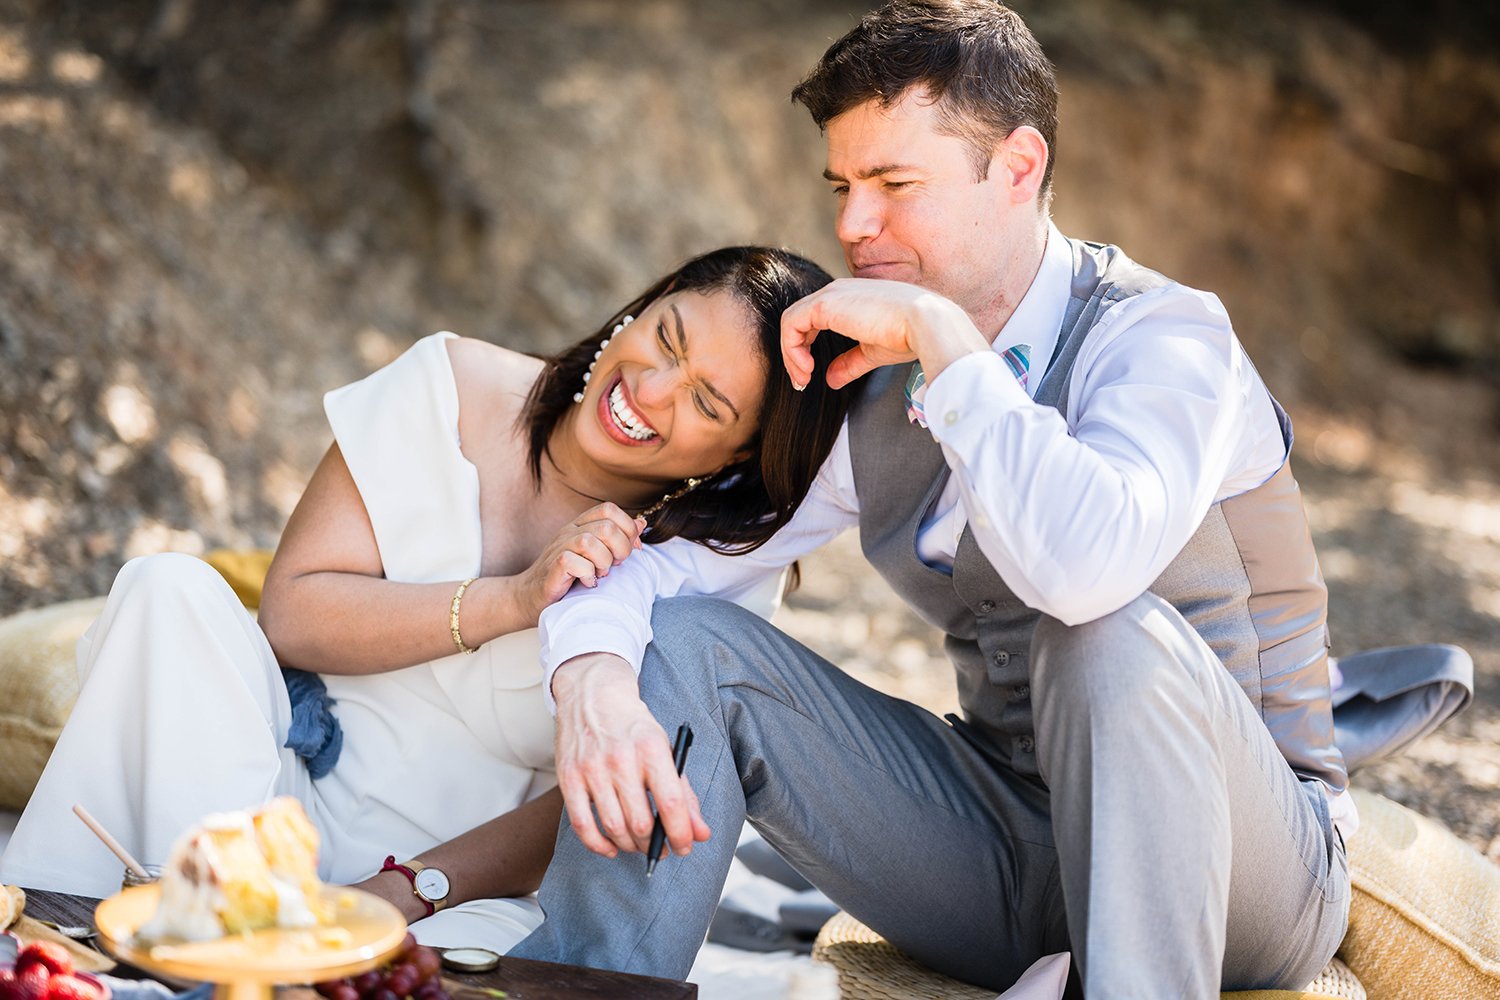 A bride laughs hard as her groom makes a funny face after eating something during their picnic that had a unpleasant taste.